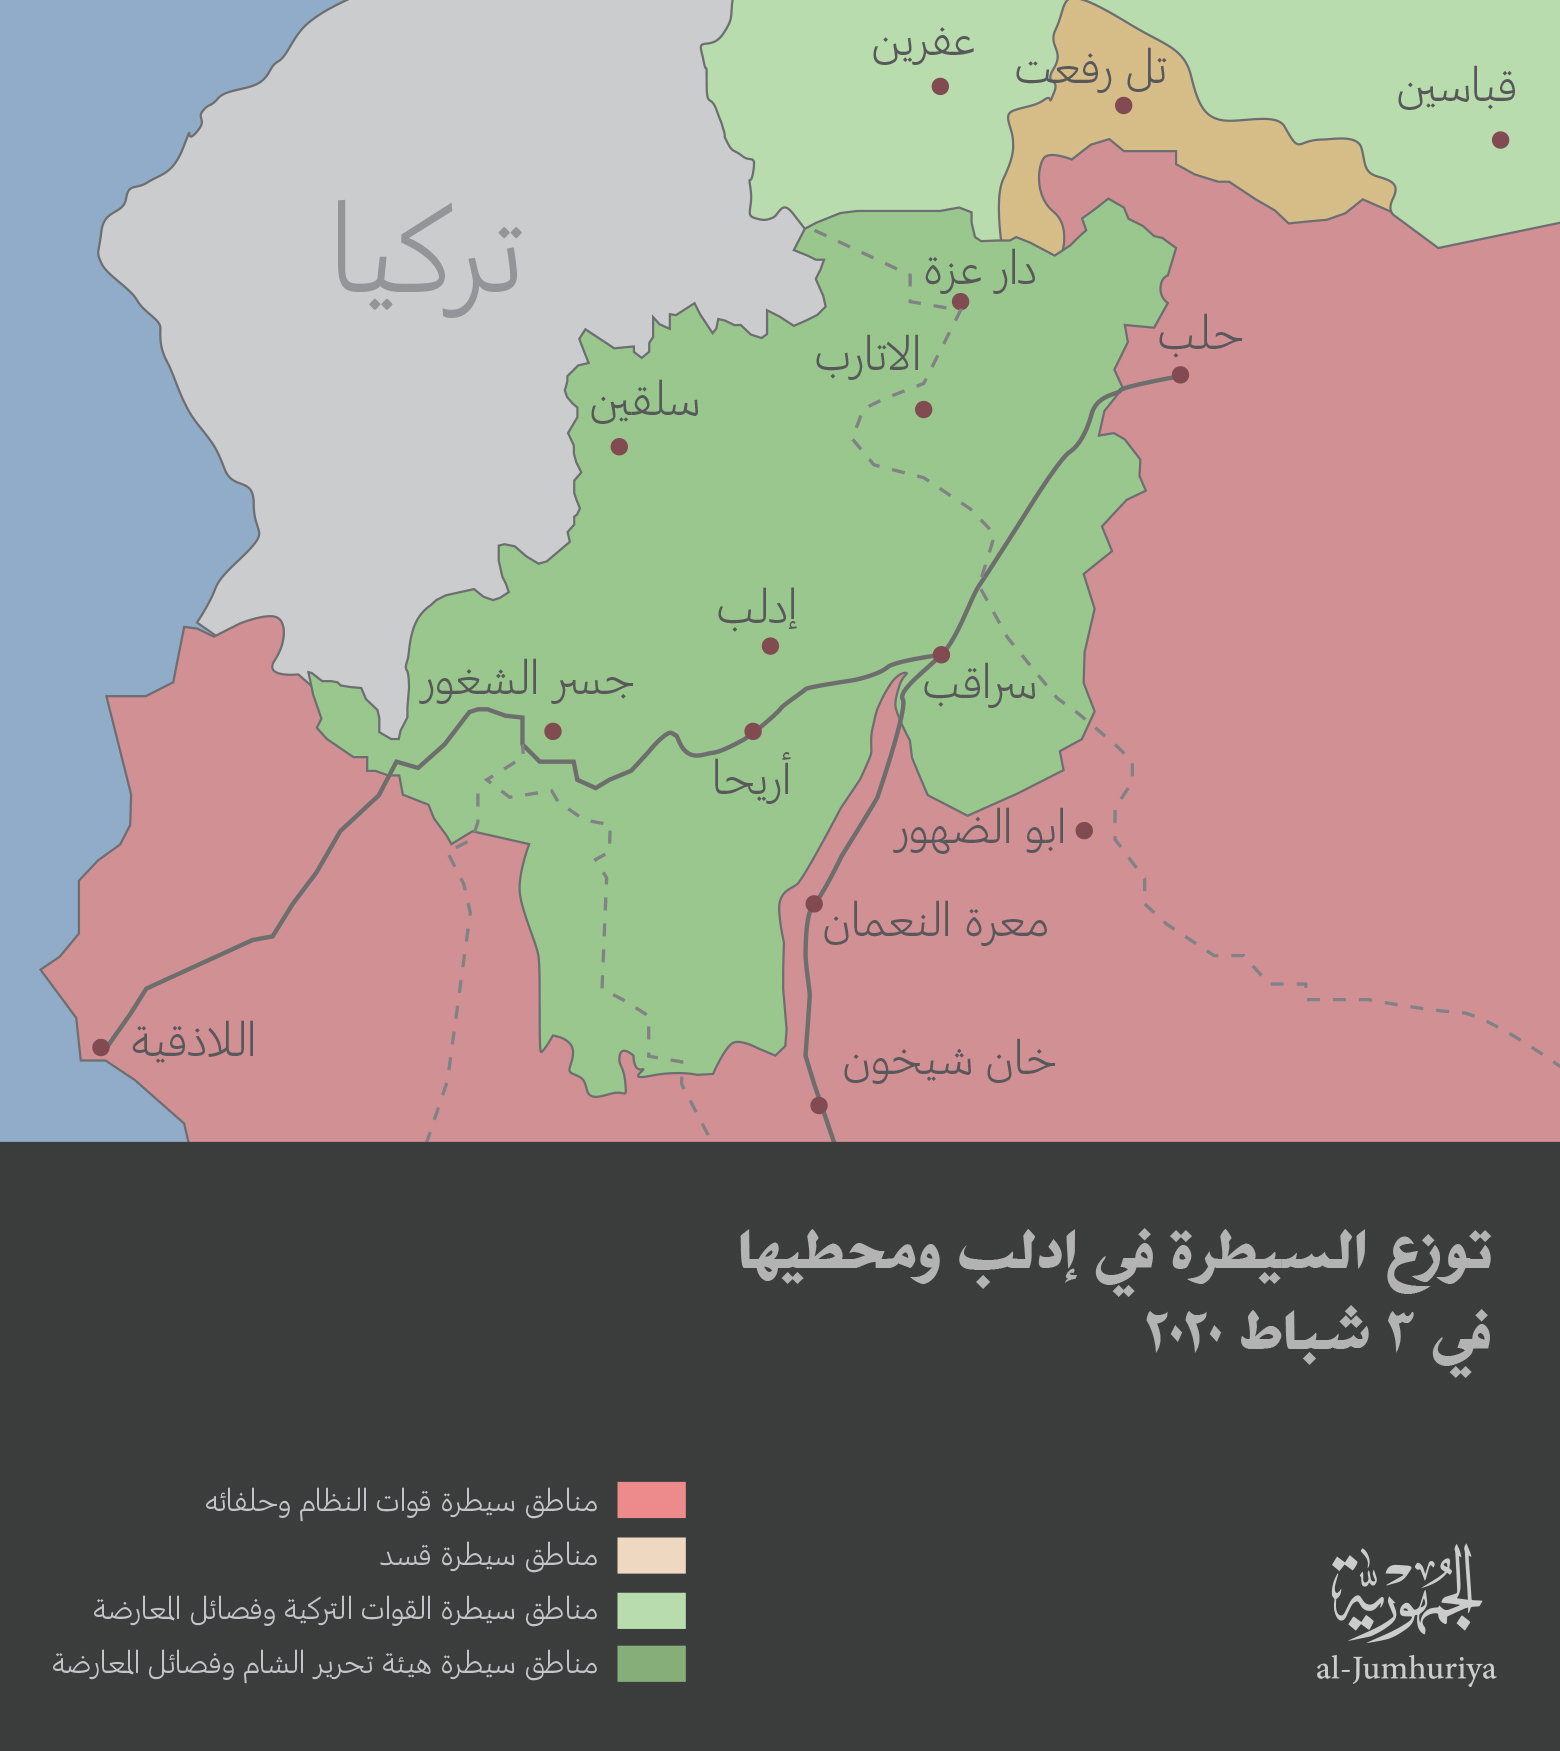 The military map as of 3 February, 2020. Since that date, Saraqeb has fallen to the pro-Assad coalition.